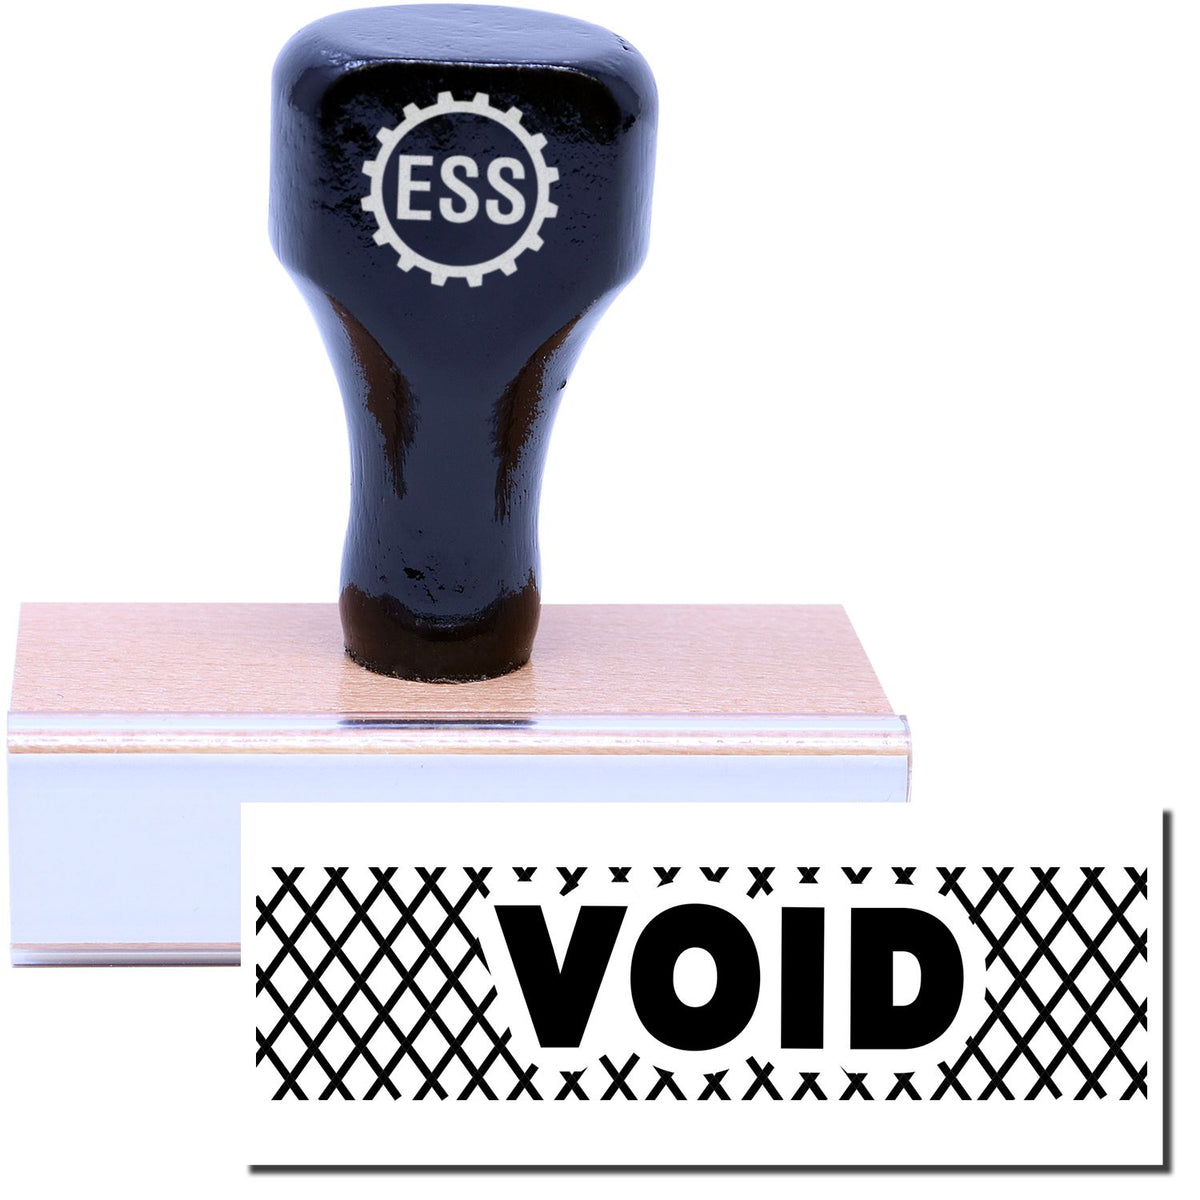 A stock office rubber stamp with a stamped image showing how the text &quot;VOID&quot; in a large font with strikelines all around the text is displayed after stamping.